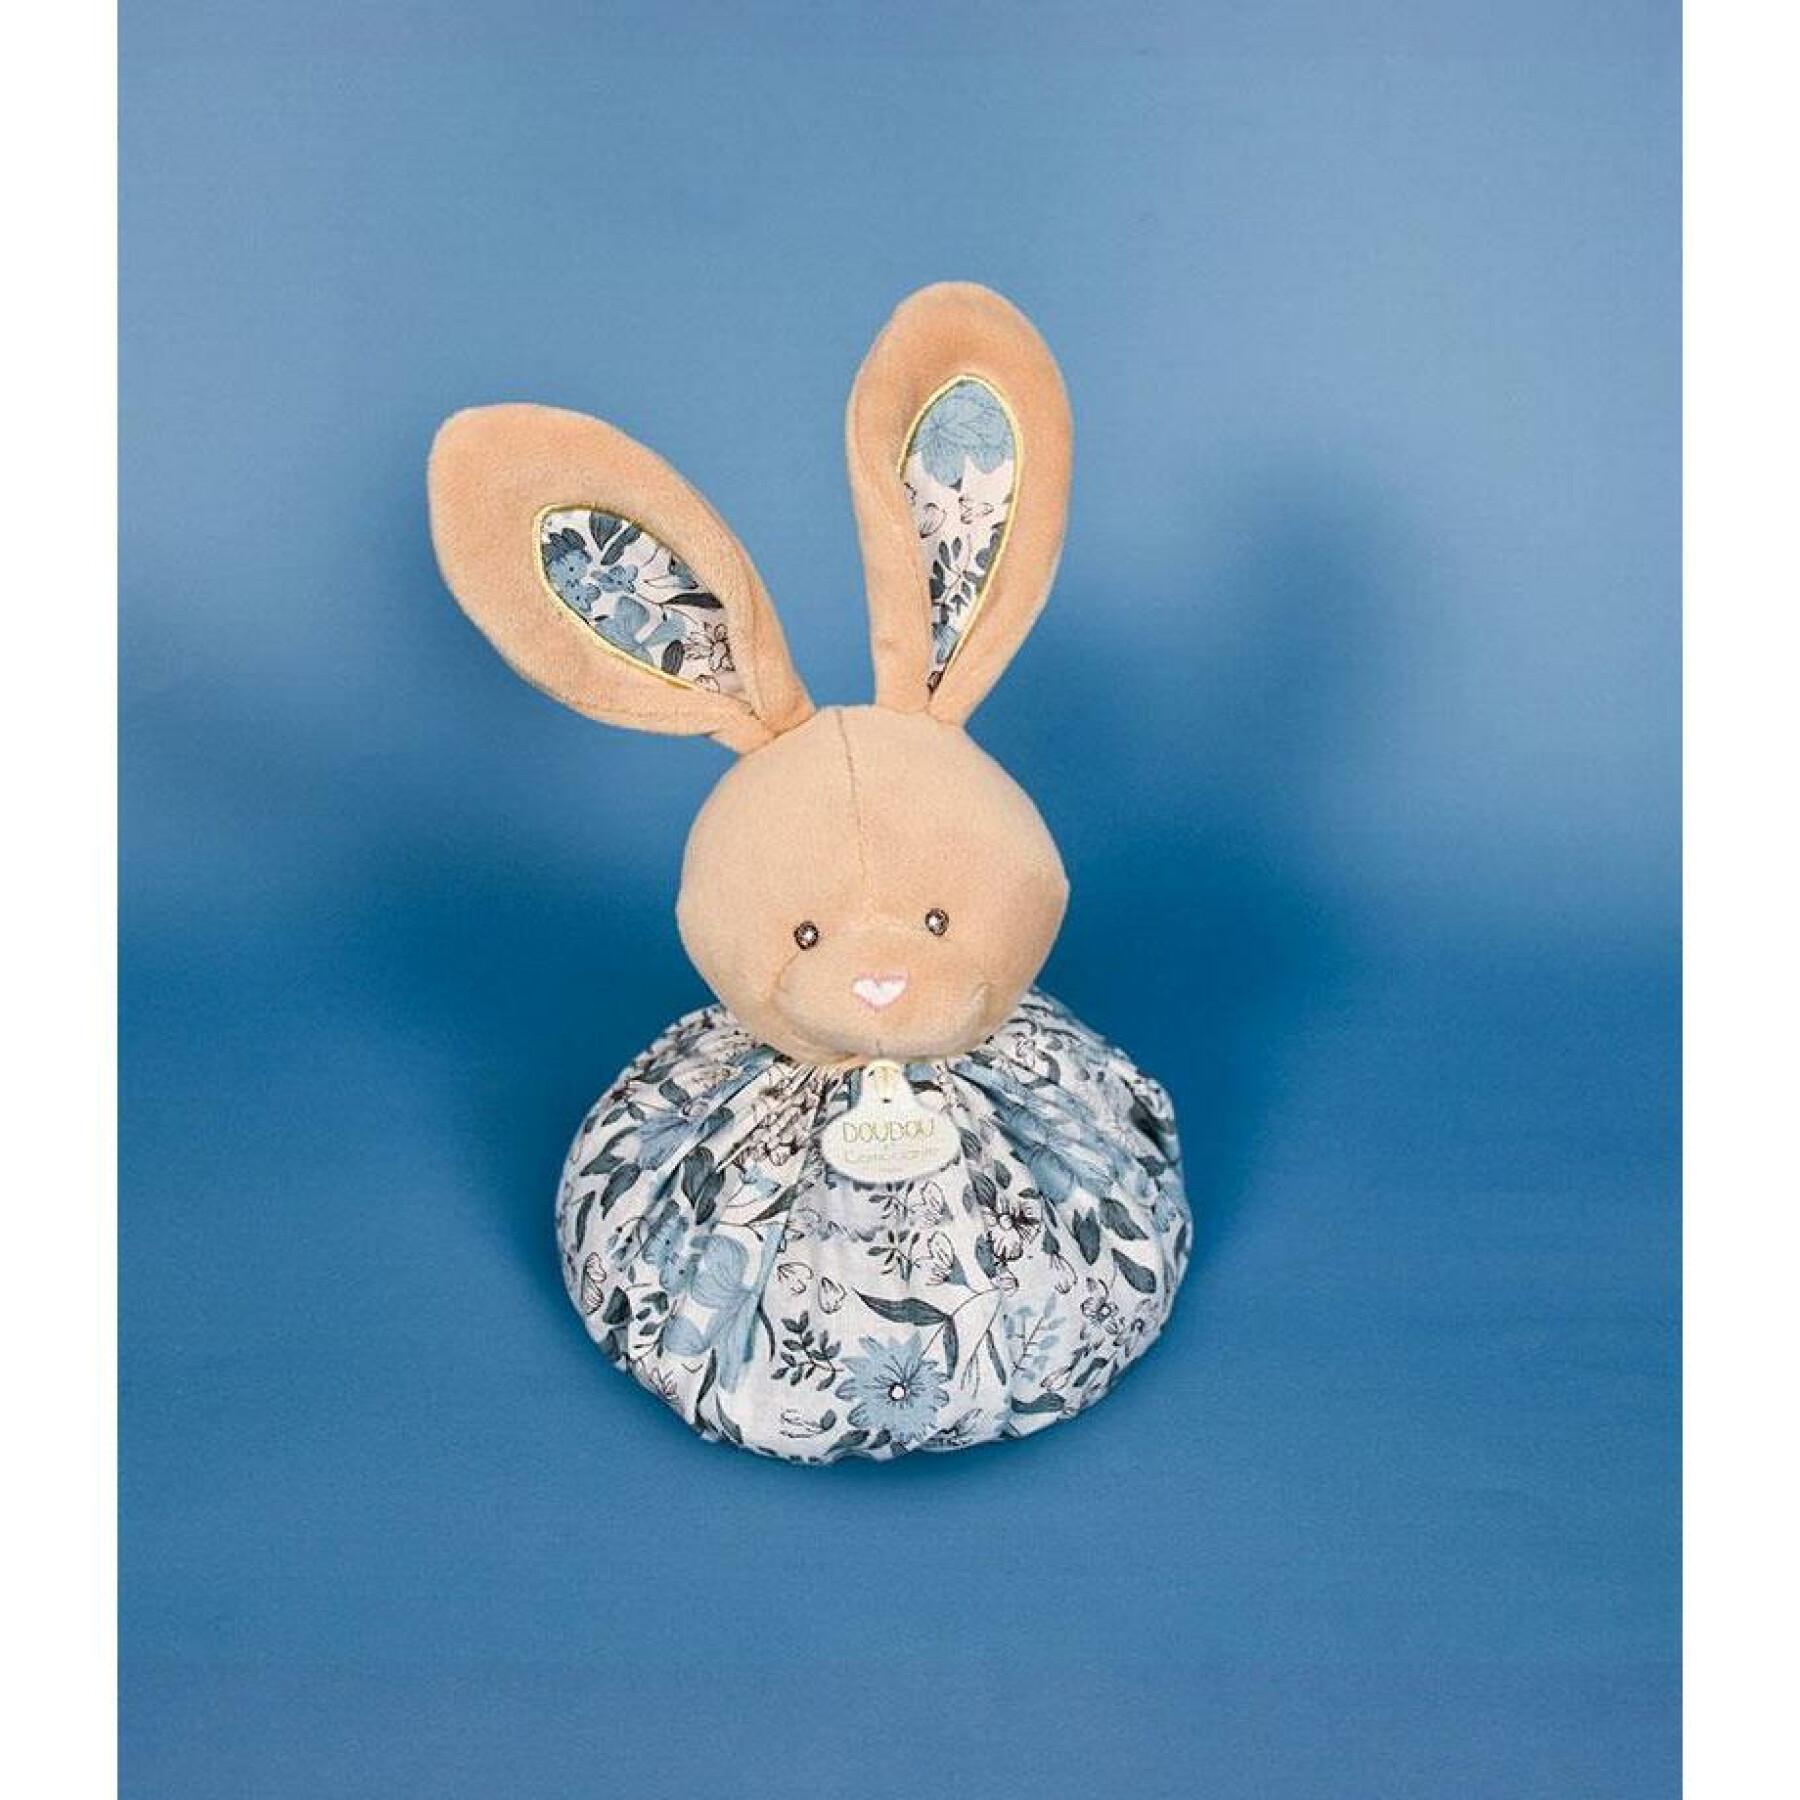 Plysch Doudou & compagnie Lapin